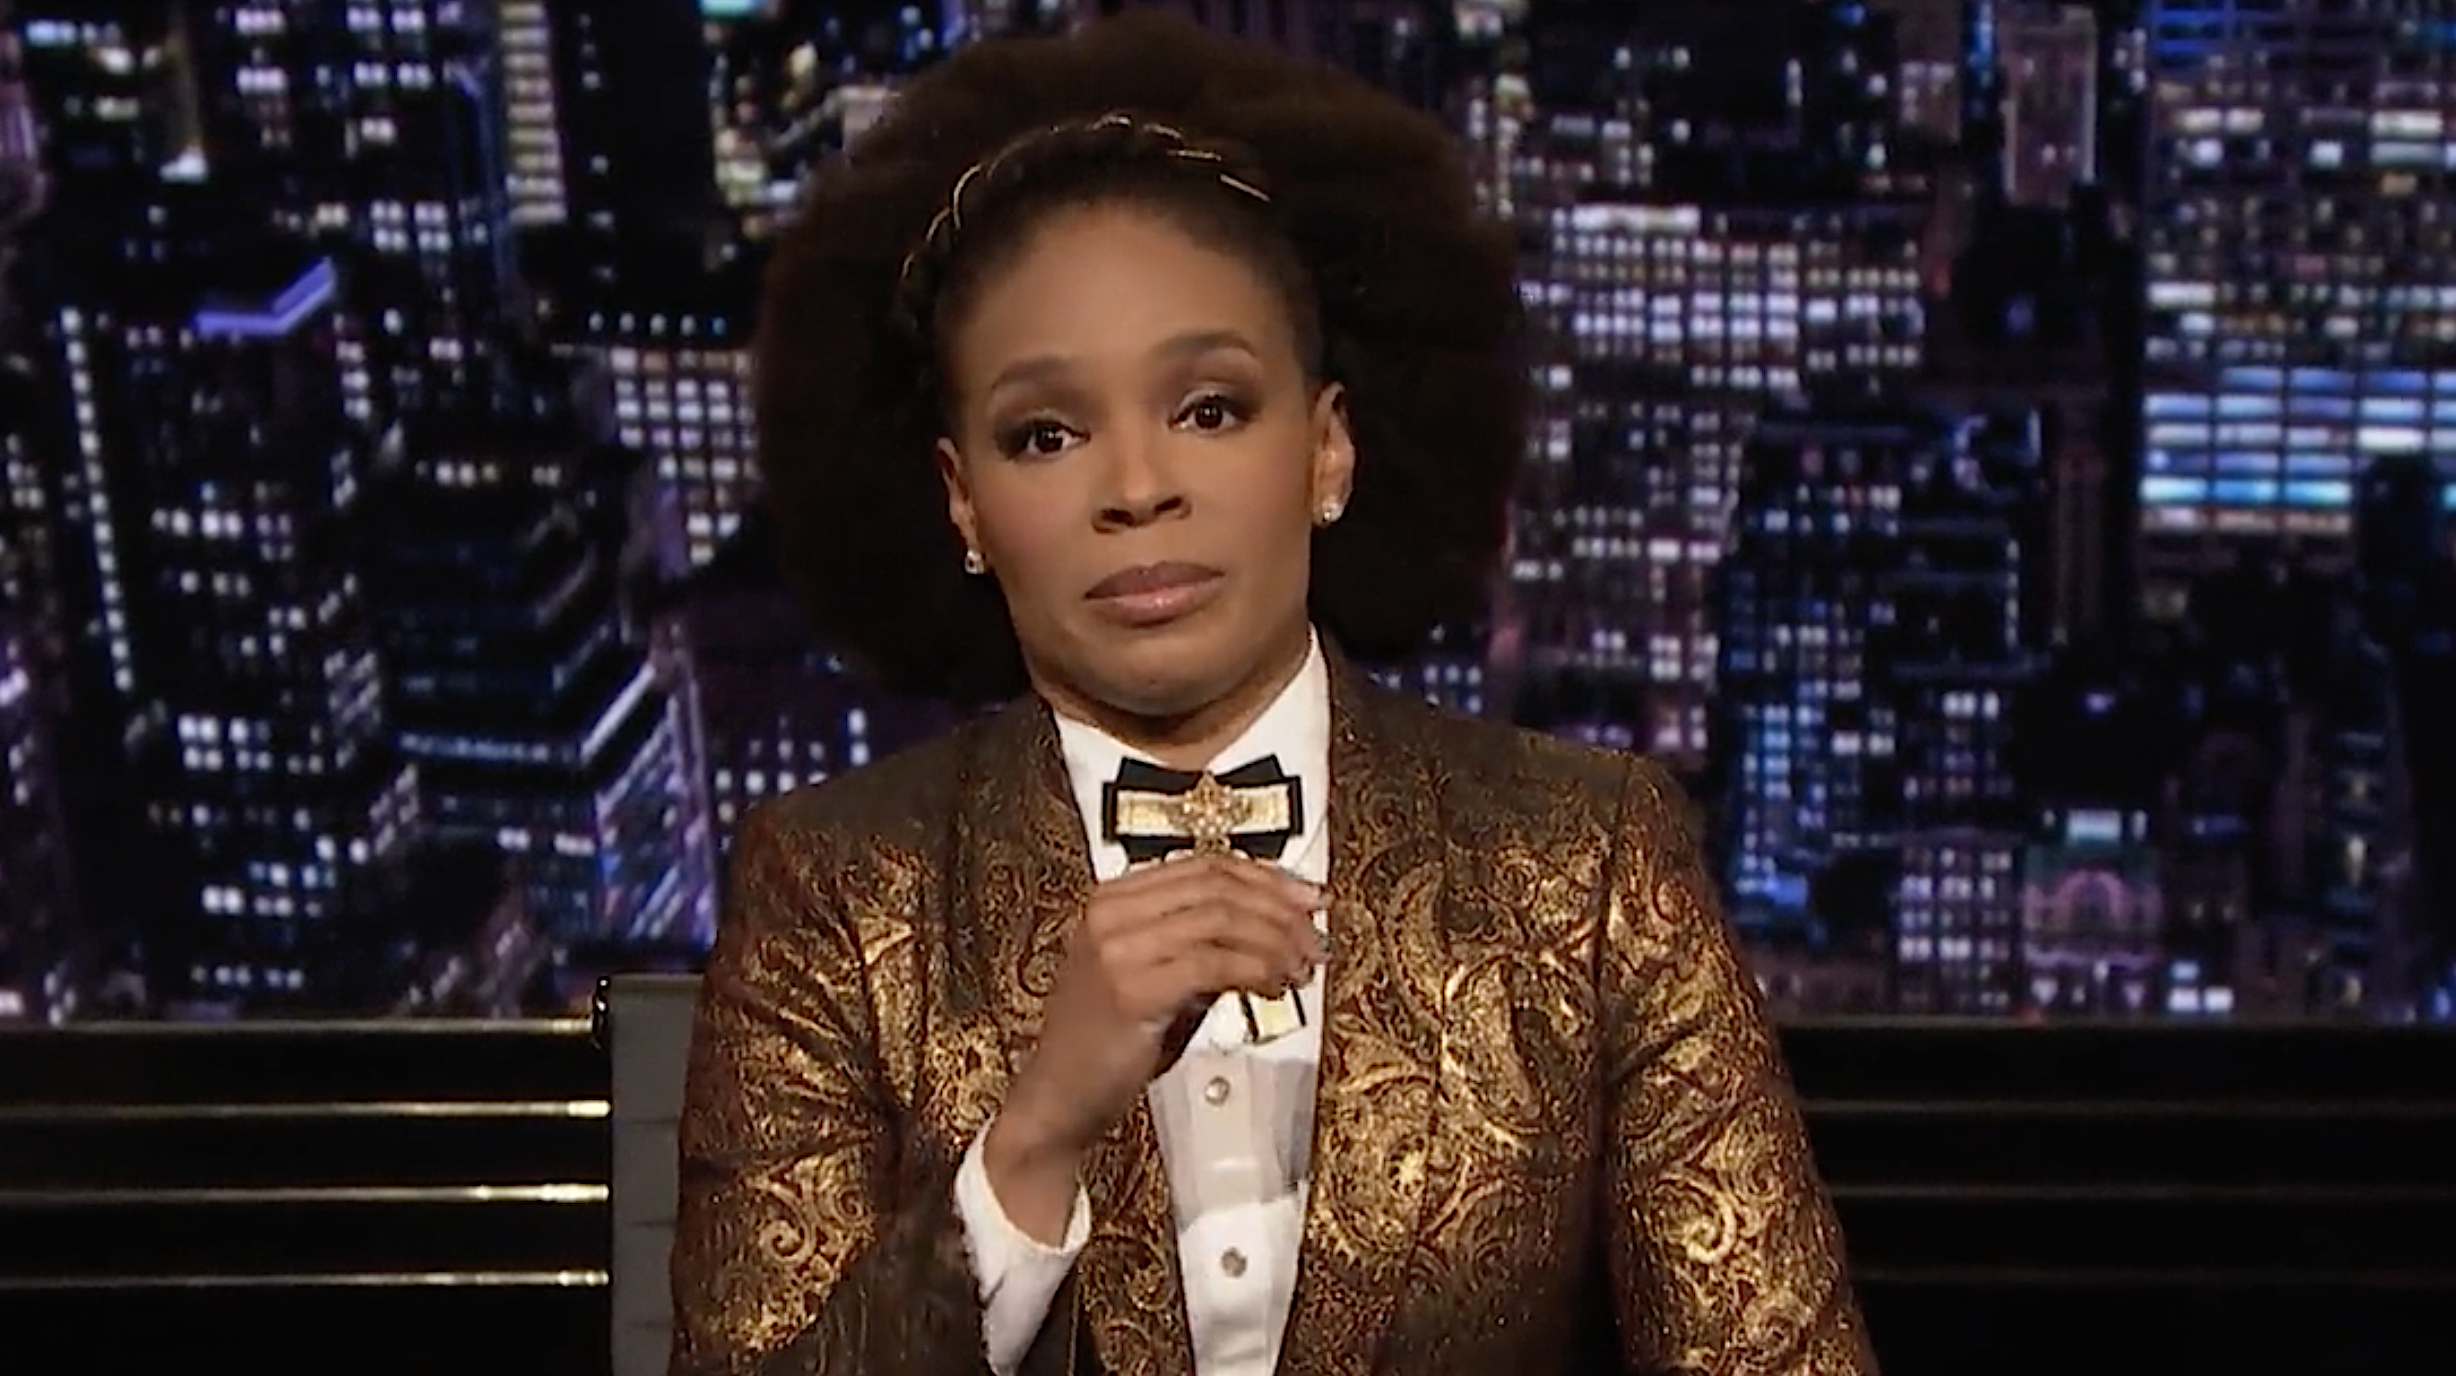 At the end of another terrible day in America, Amber Ruffin has a message for people who need it